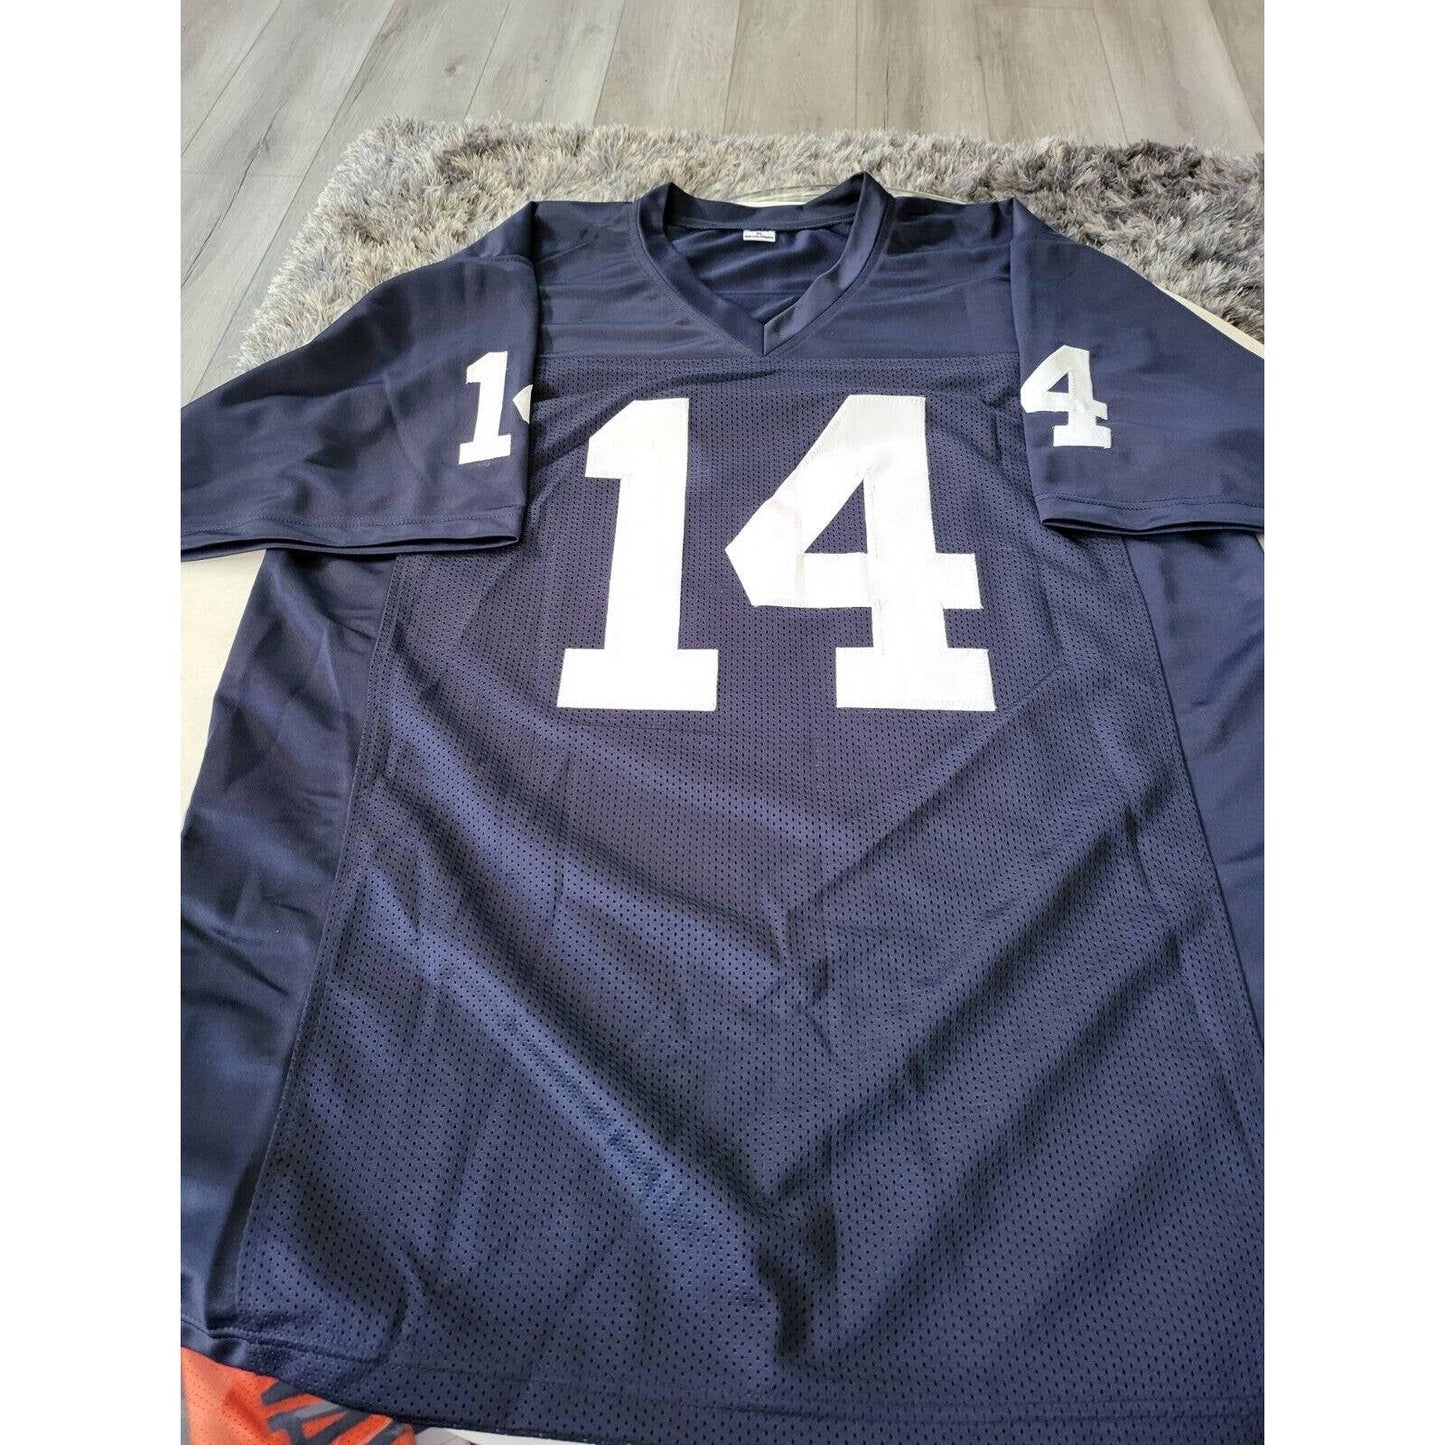 Chuck Fusina Autographed/Signed Jersey Penn State St Nittany Lions - TreasuresEvolved